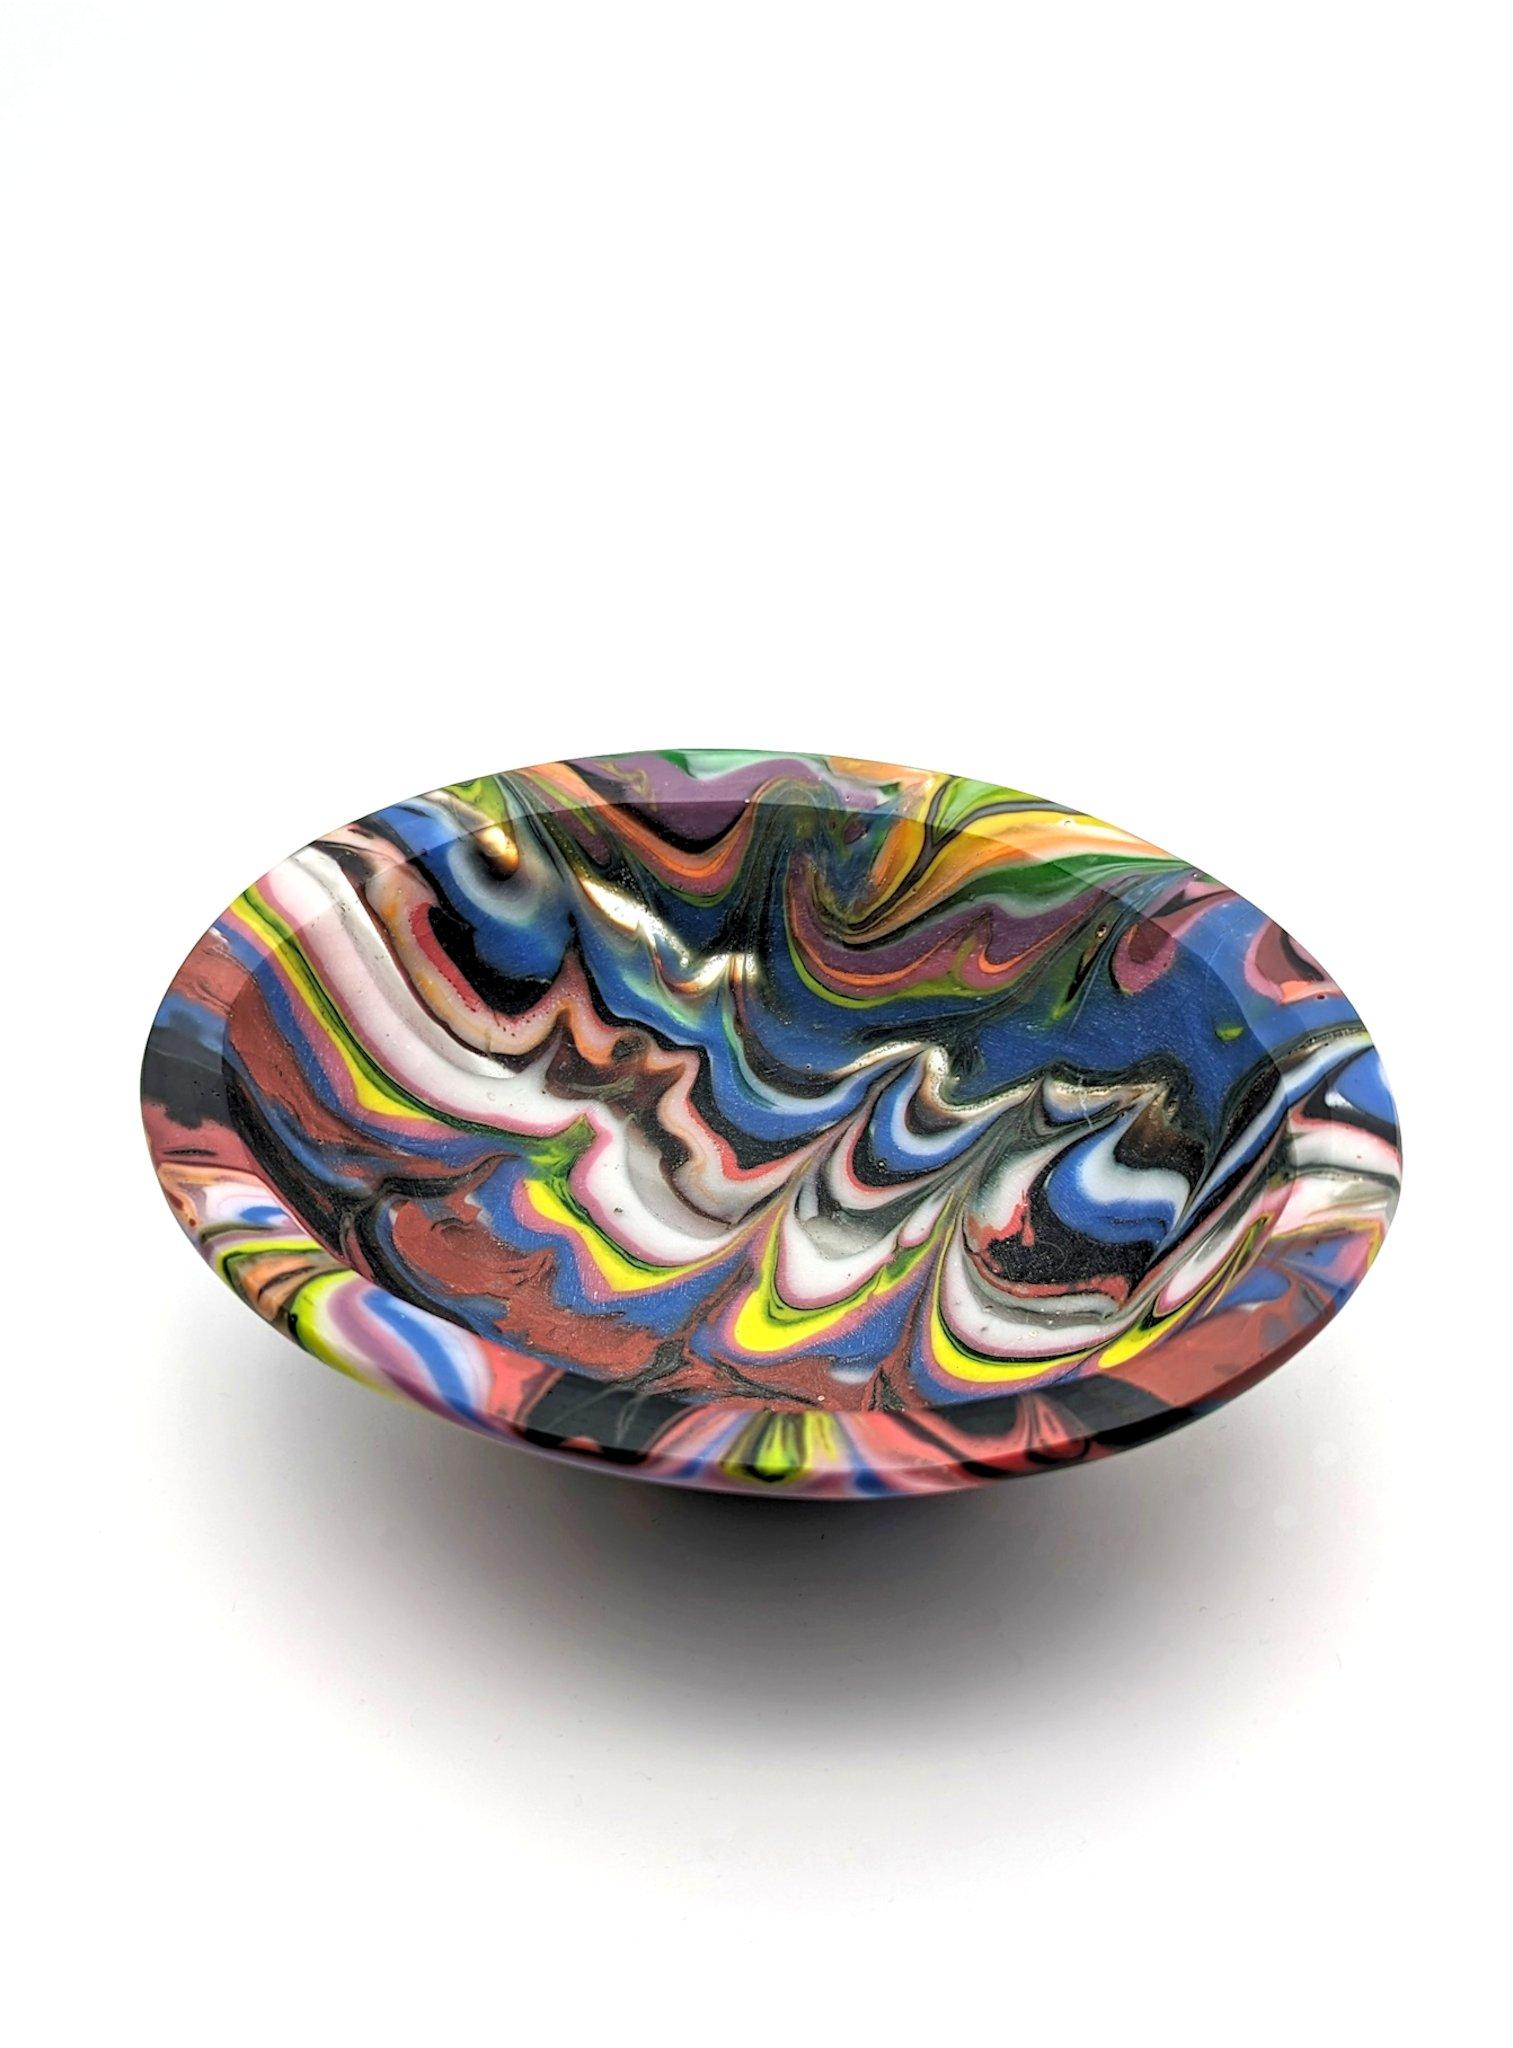 A lovely kiln-formed  and wheel cut mosaic glass bowl from Klaus Moje's time in Canberra. Cf.: Dan Klein, 